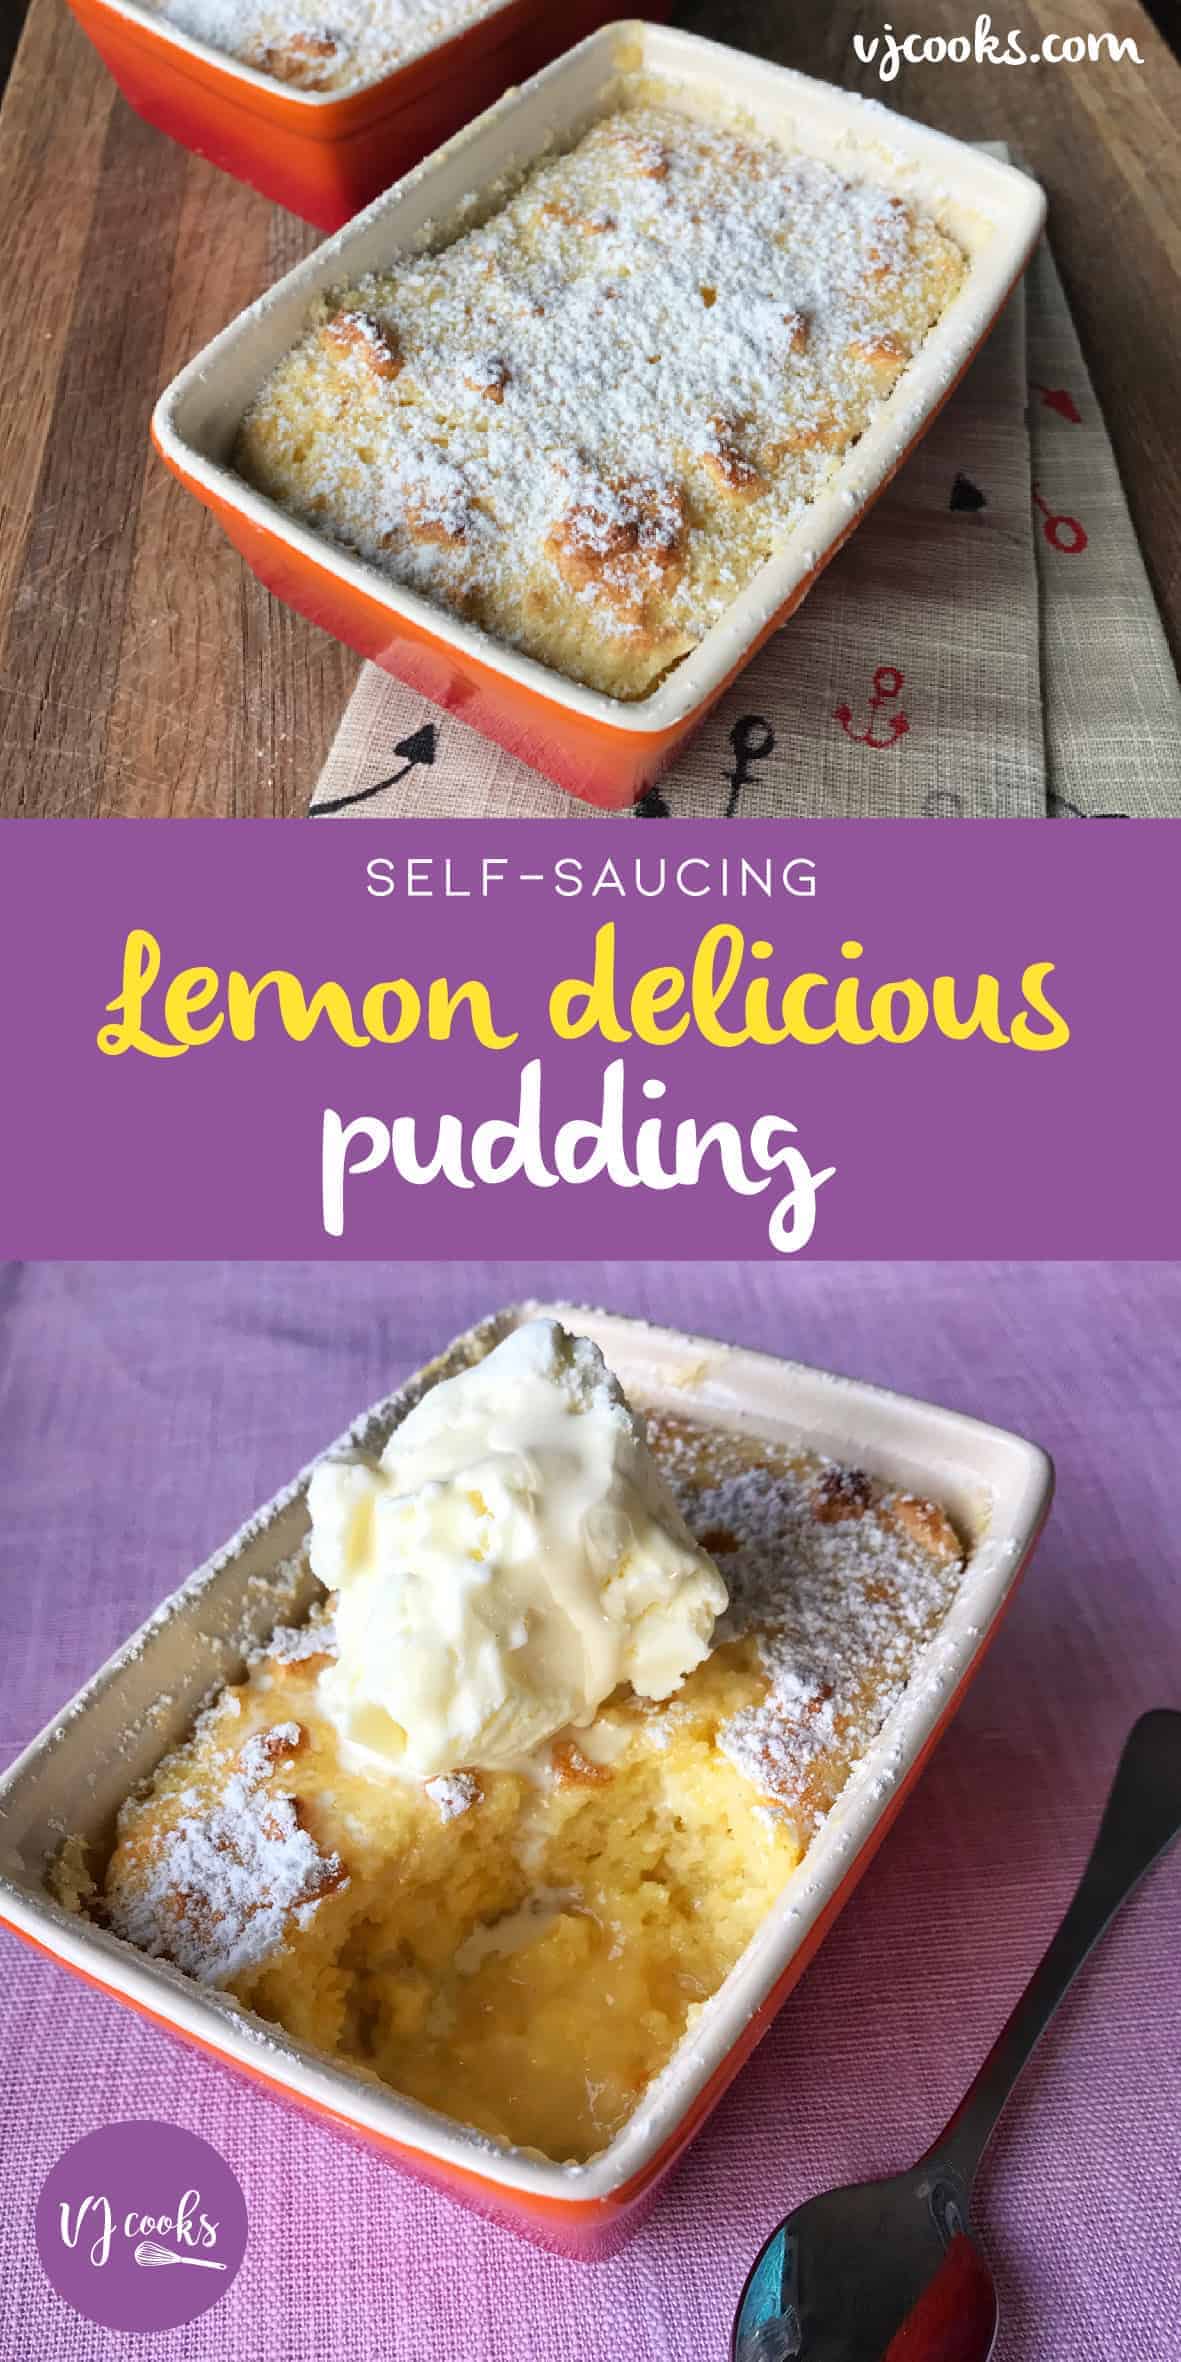 Lemon delicious self-saucing pudding, easy recipe from VJ cooks 